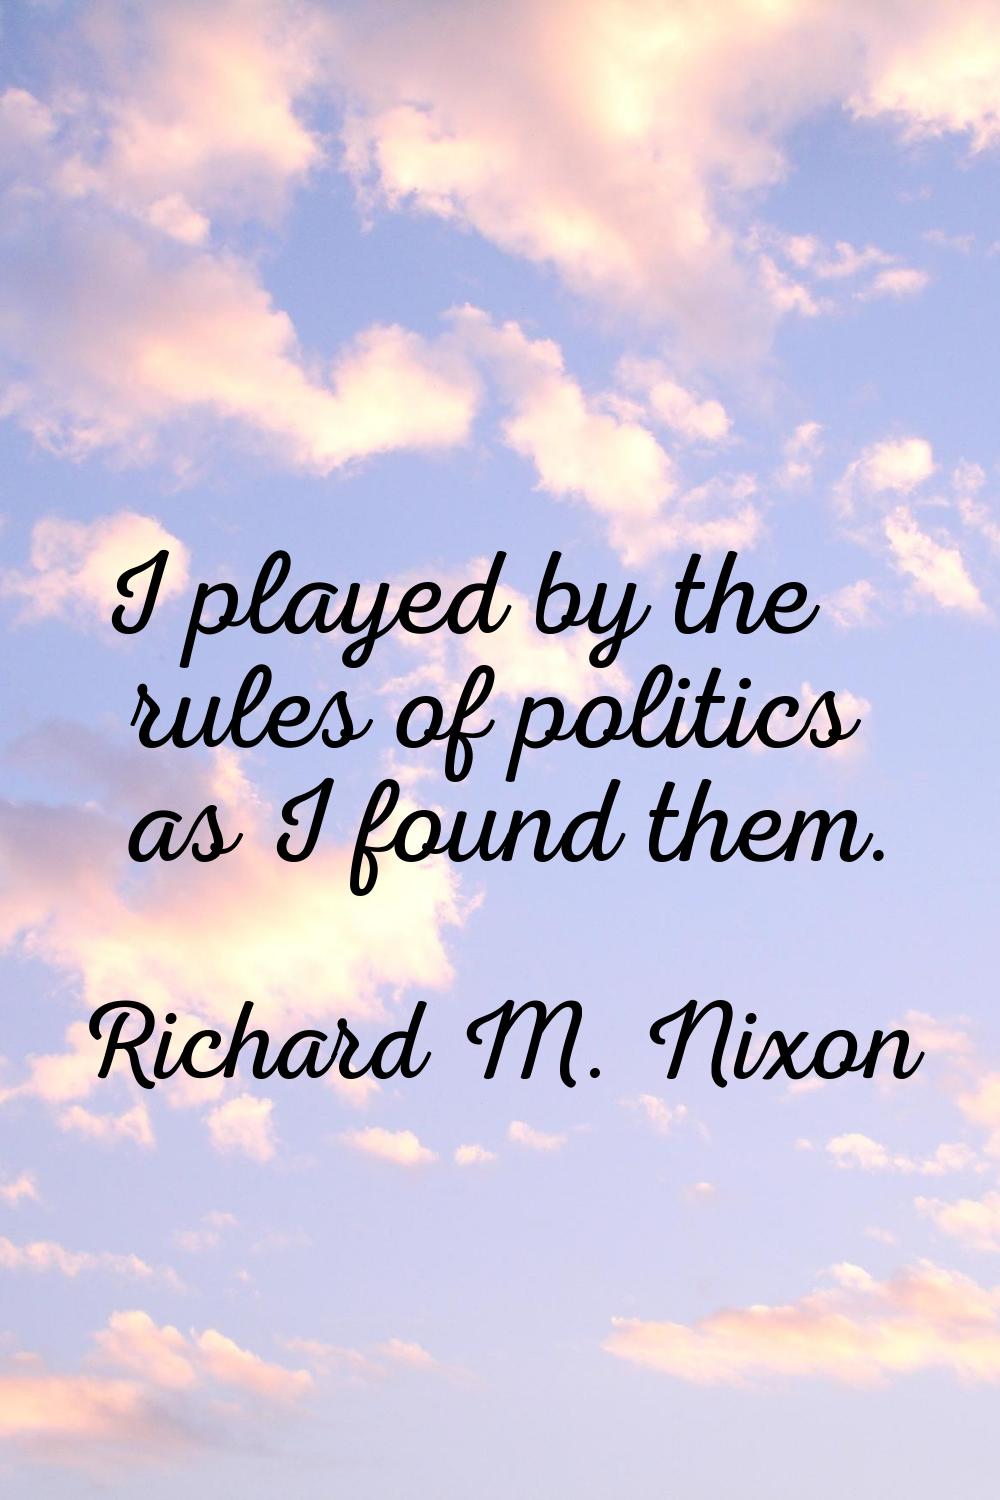 I played by the rules of politics as I found them.